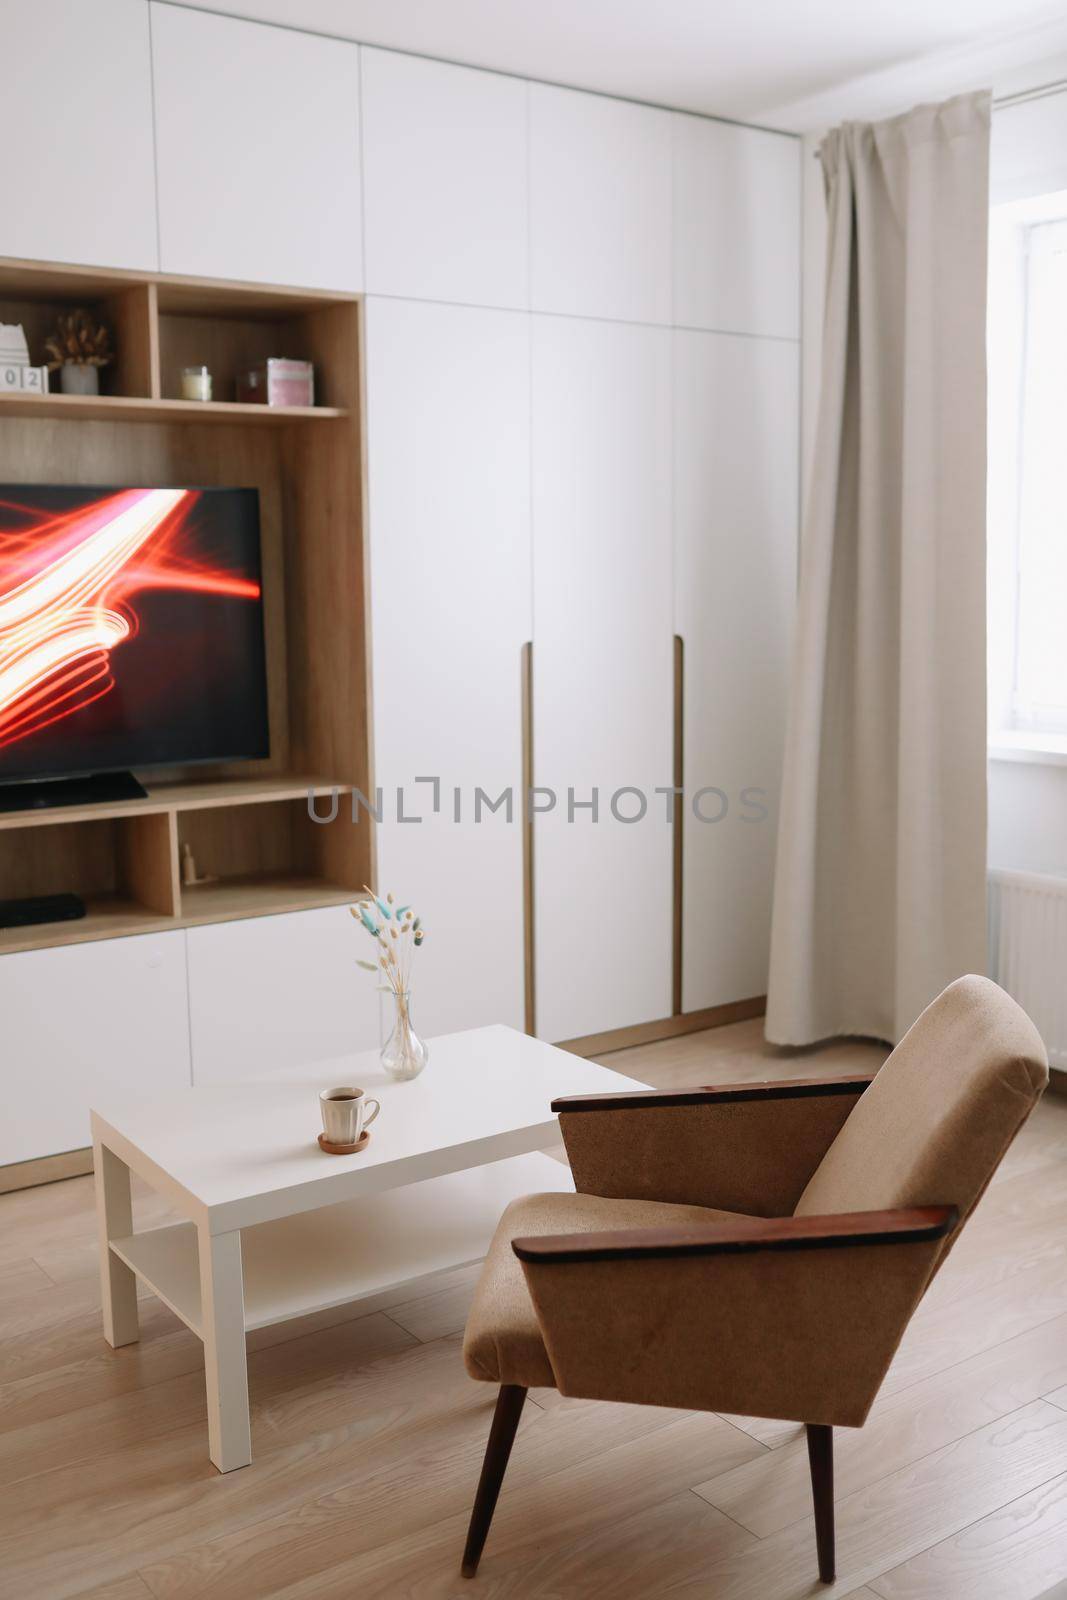 Stylish modern living room interior design with TV, armchair, coffee table and a window with curtains. Minimalistic apartment for rent. 